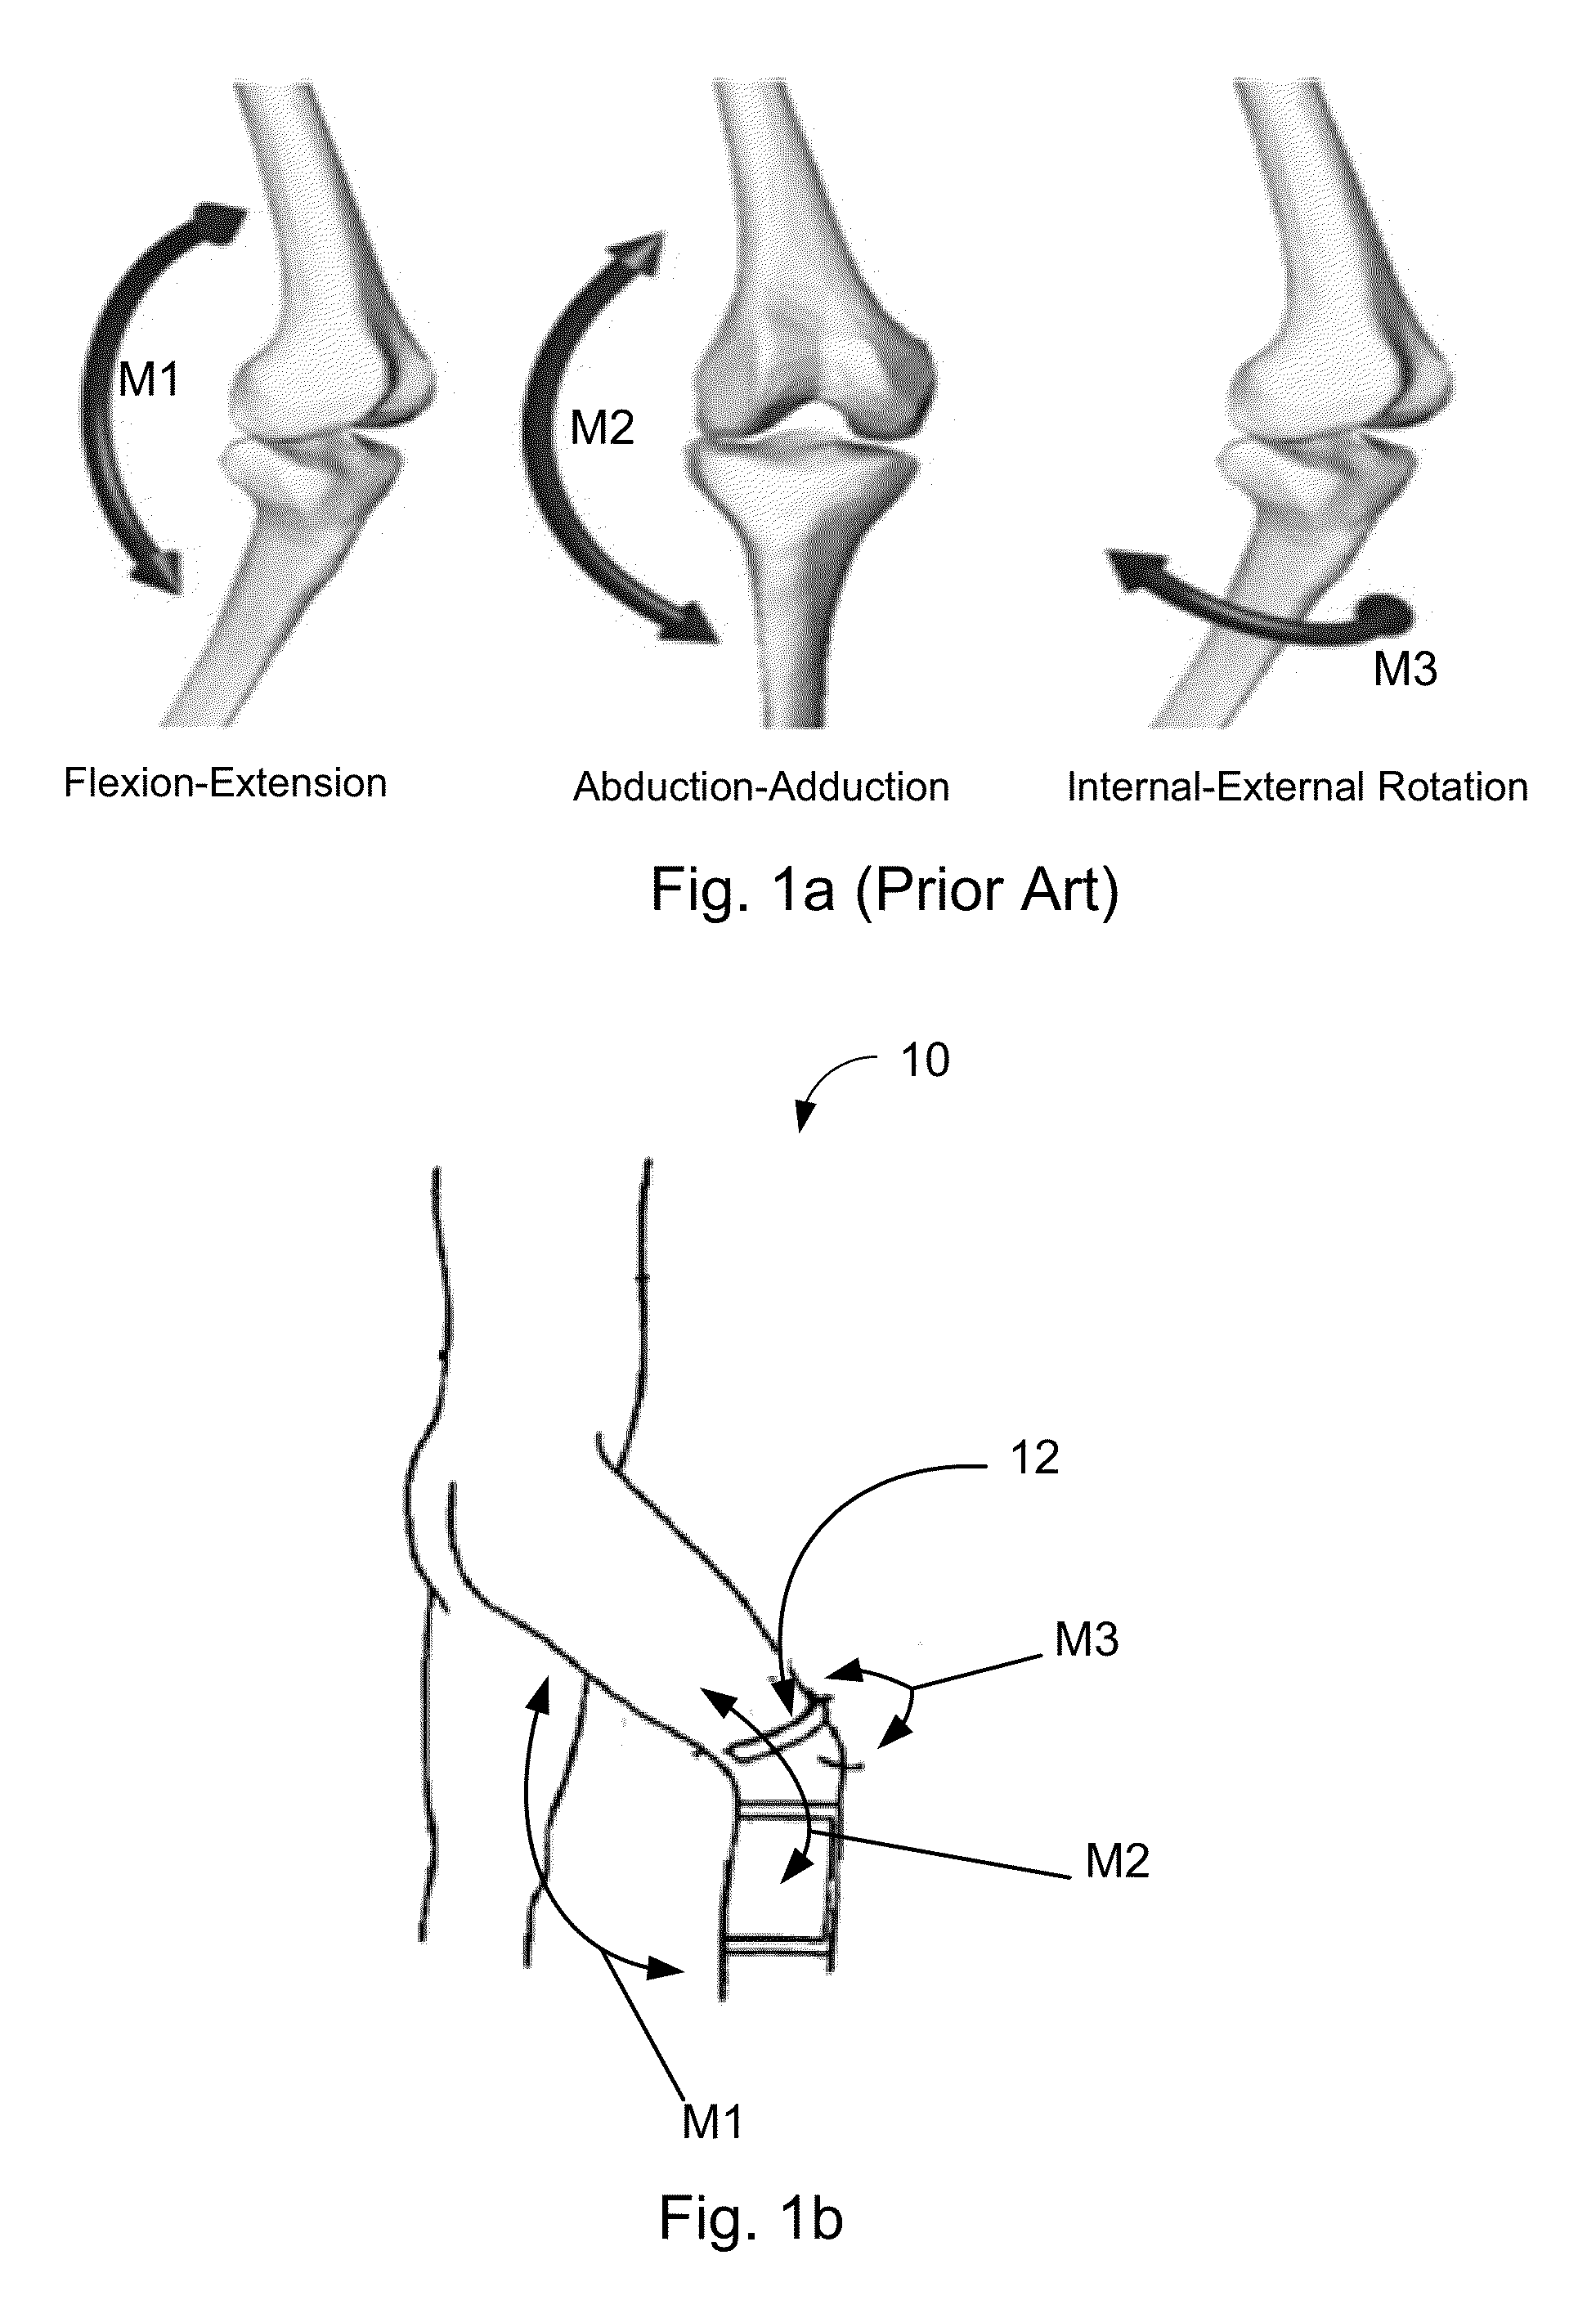 Method and system for human joint treatment plan and personalized surgery planning using 3-d kinematics, fusion imaging and simulation